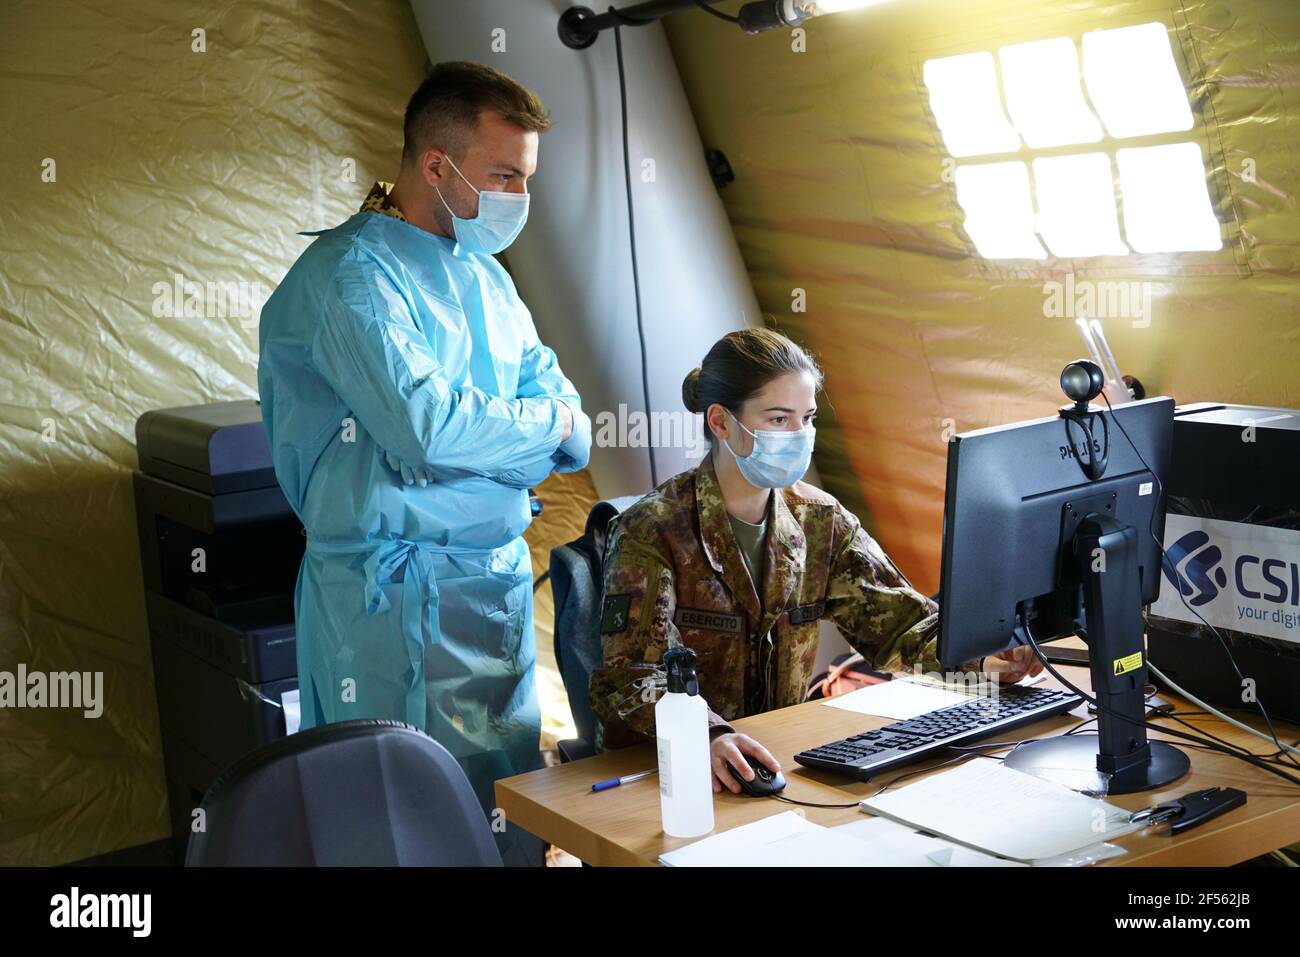 Hotspot for mass immunisation with three vaccination lines manned by army medical staff. Turin, Italy - March 2021 Stock Photo